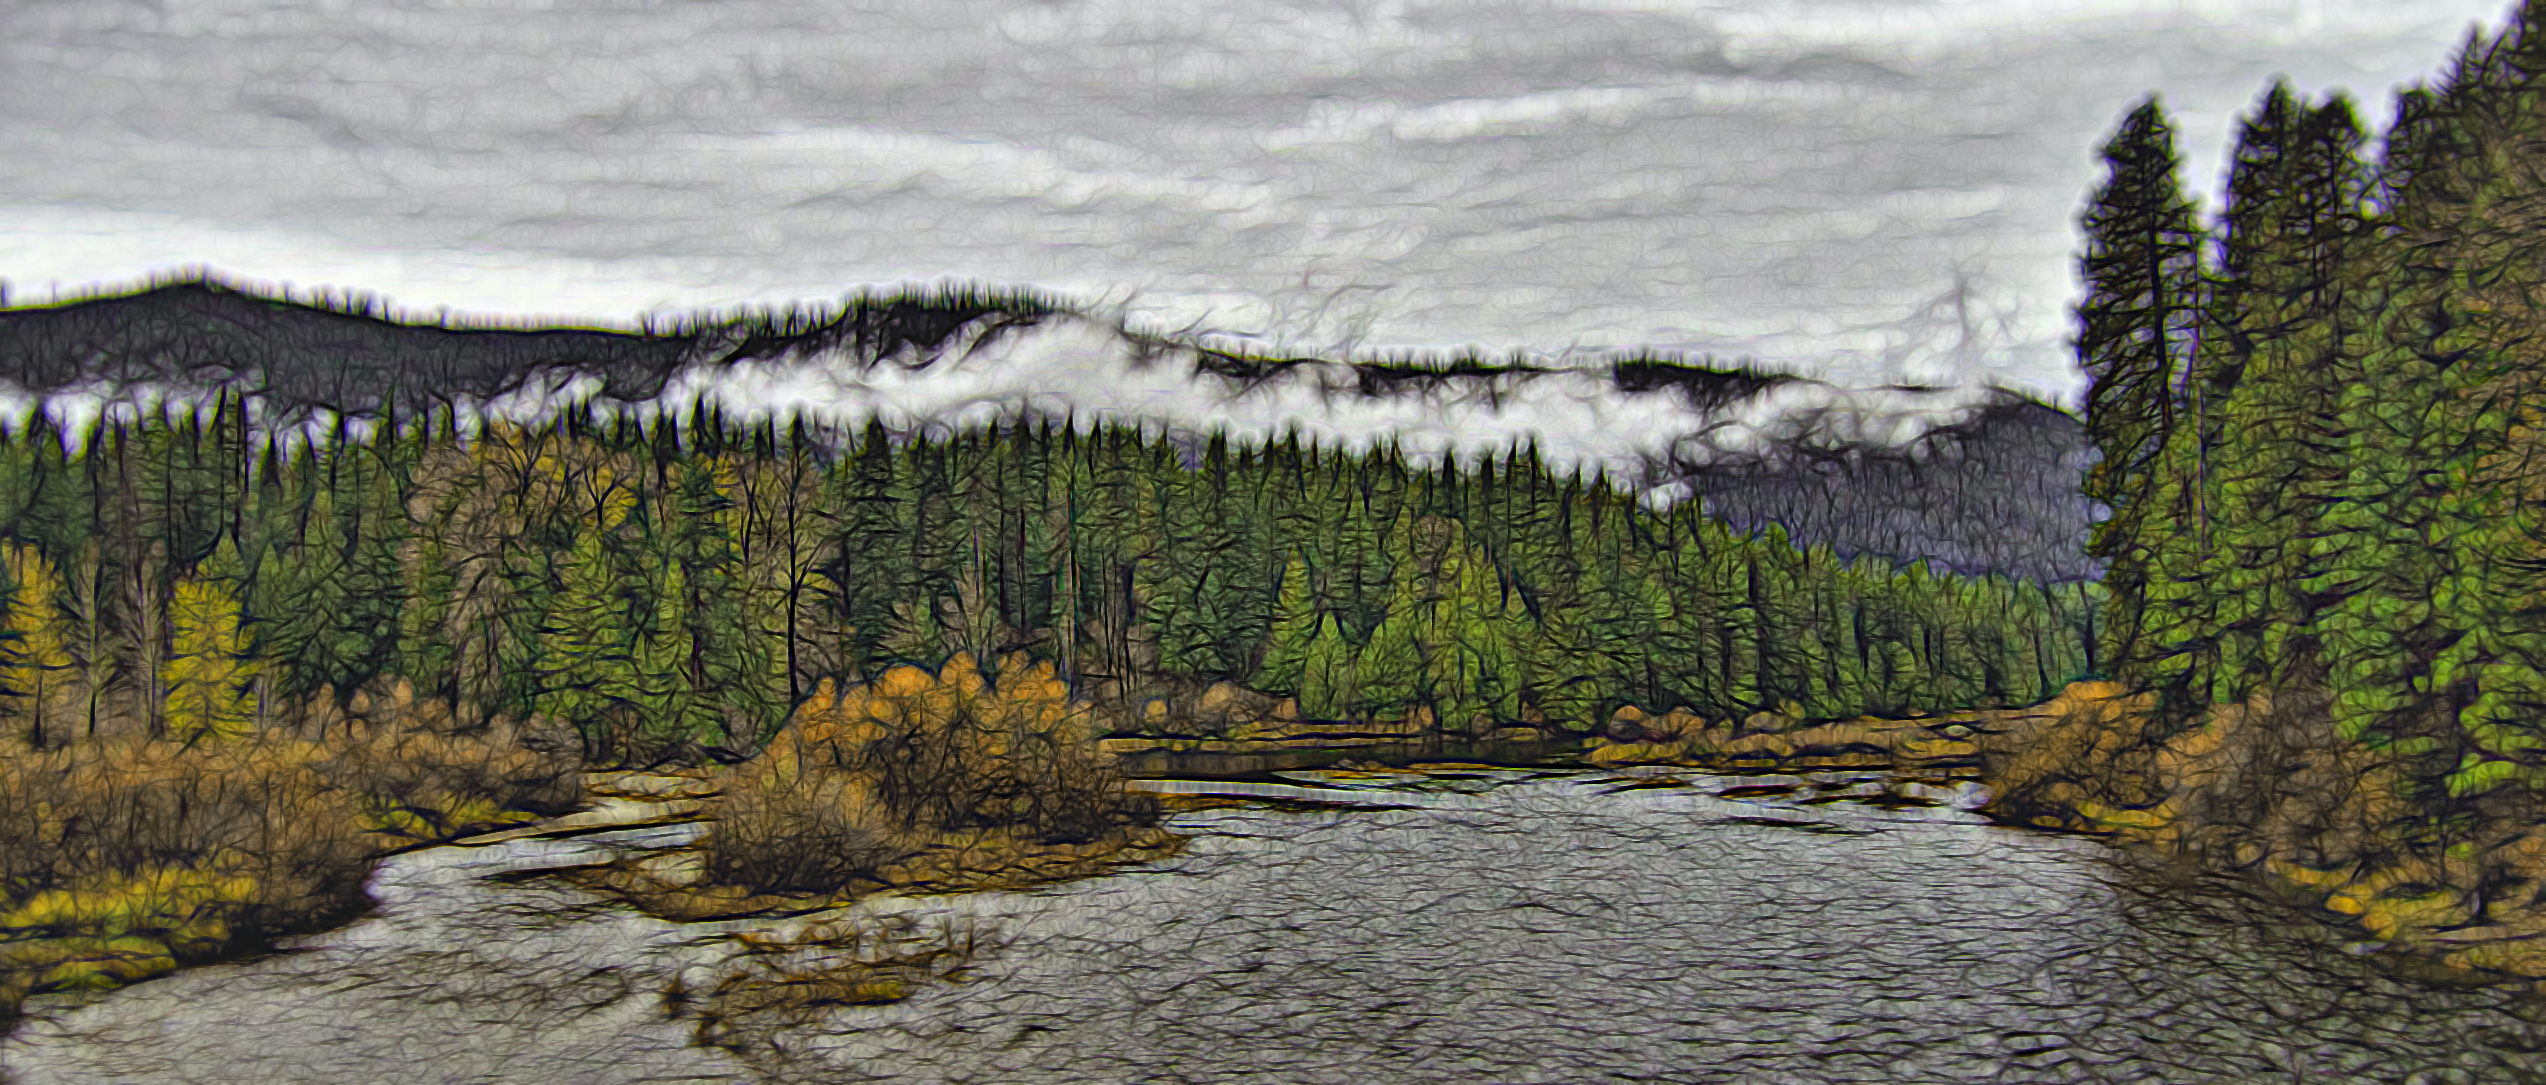 Looking out over the Wenatchee RIver at Lake Wenatchee State Park